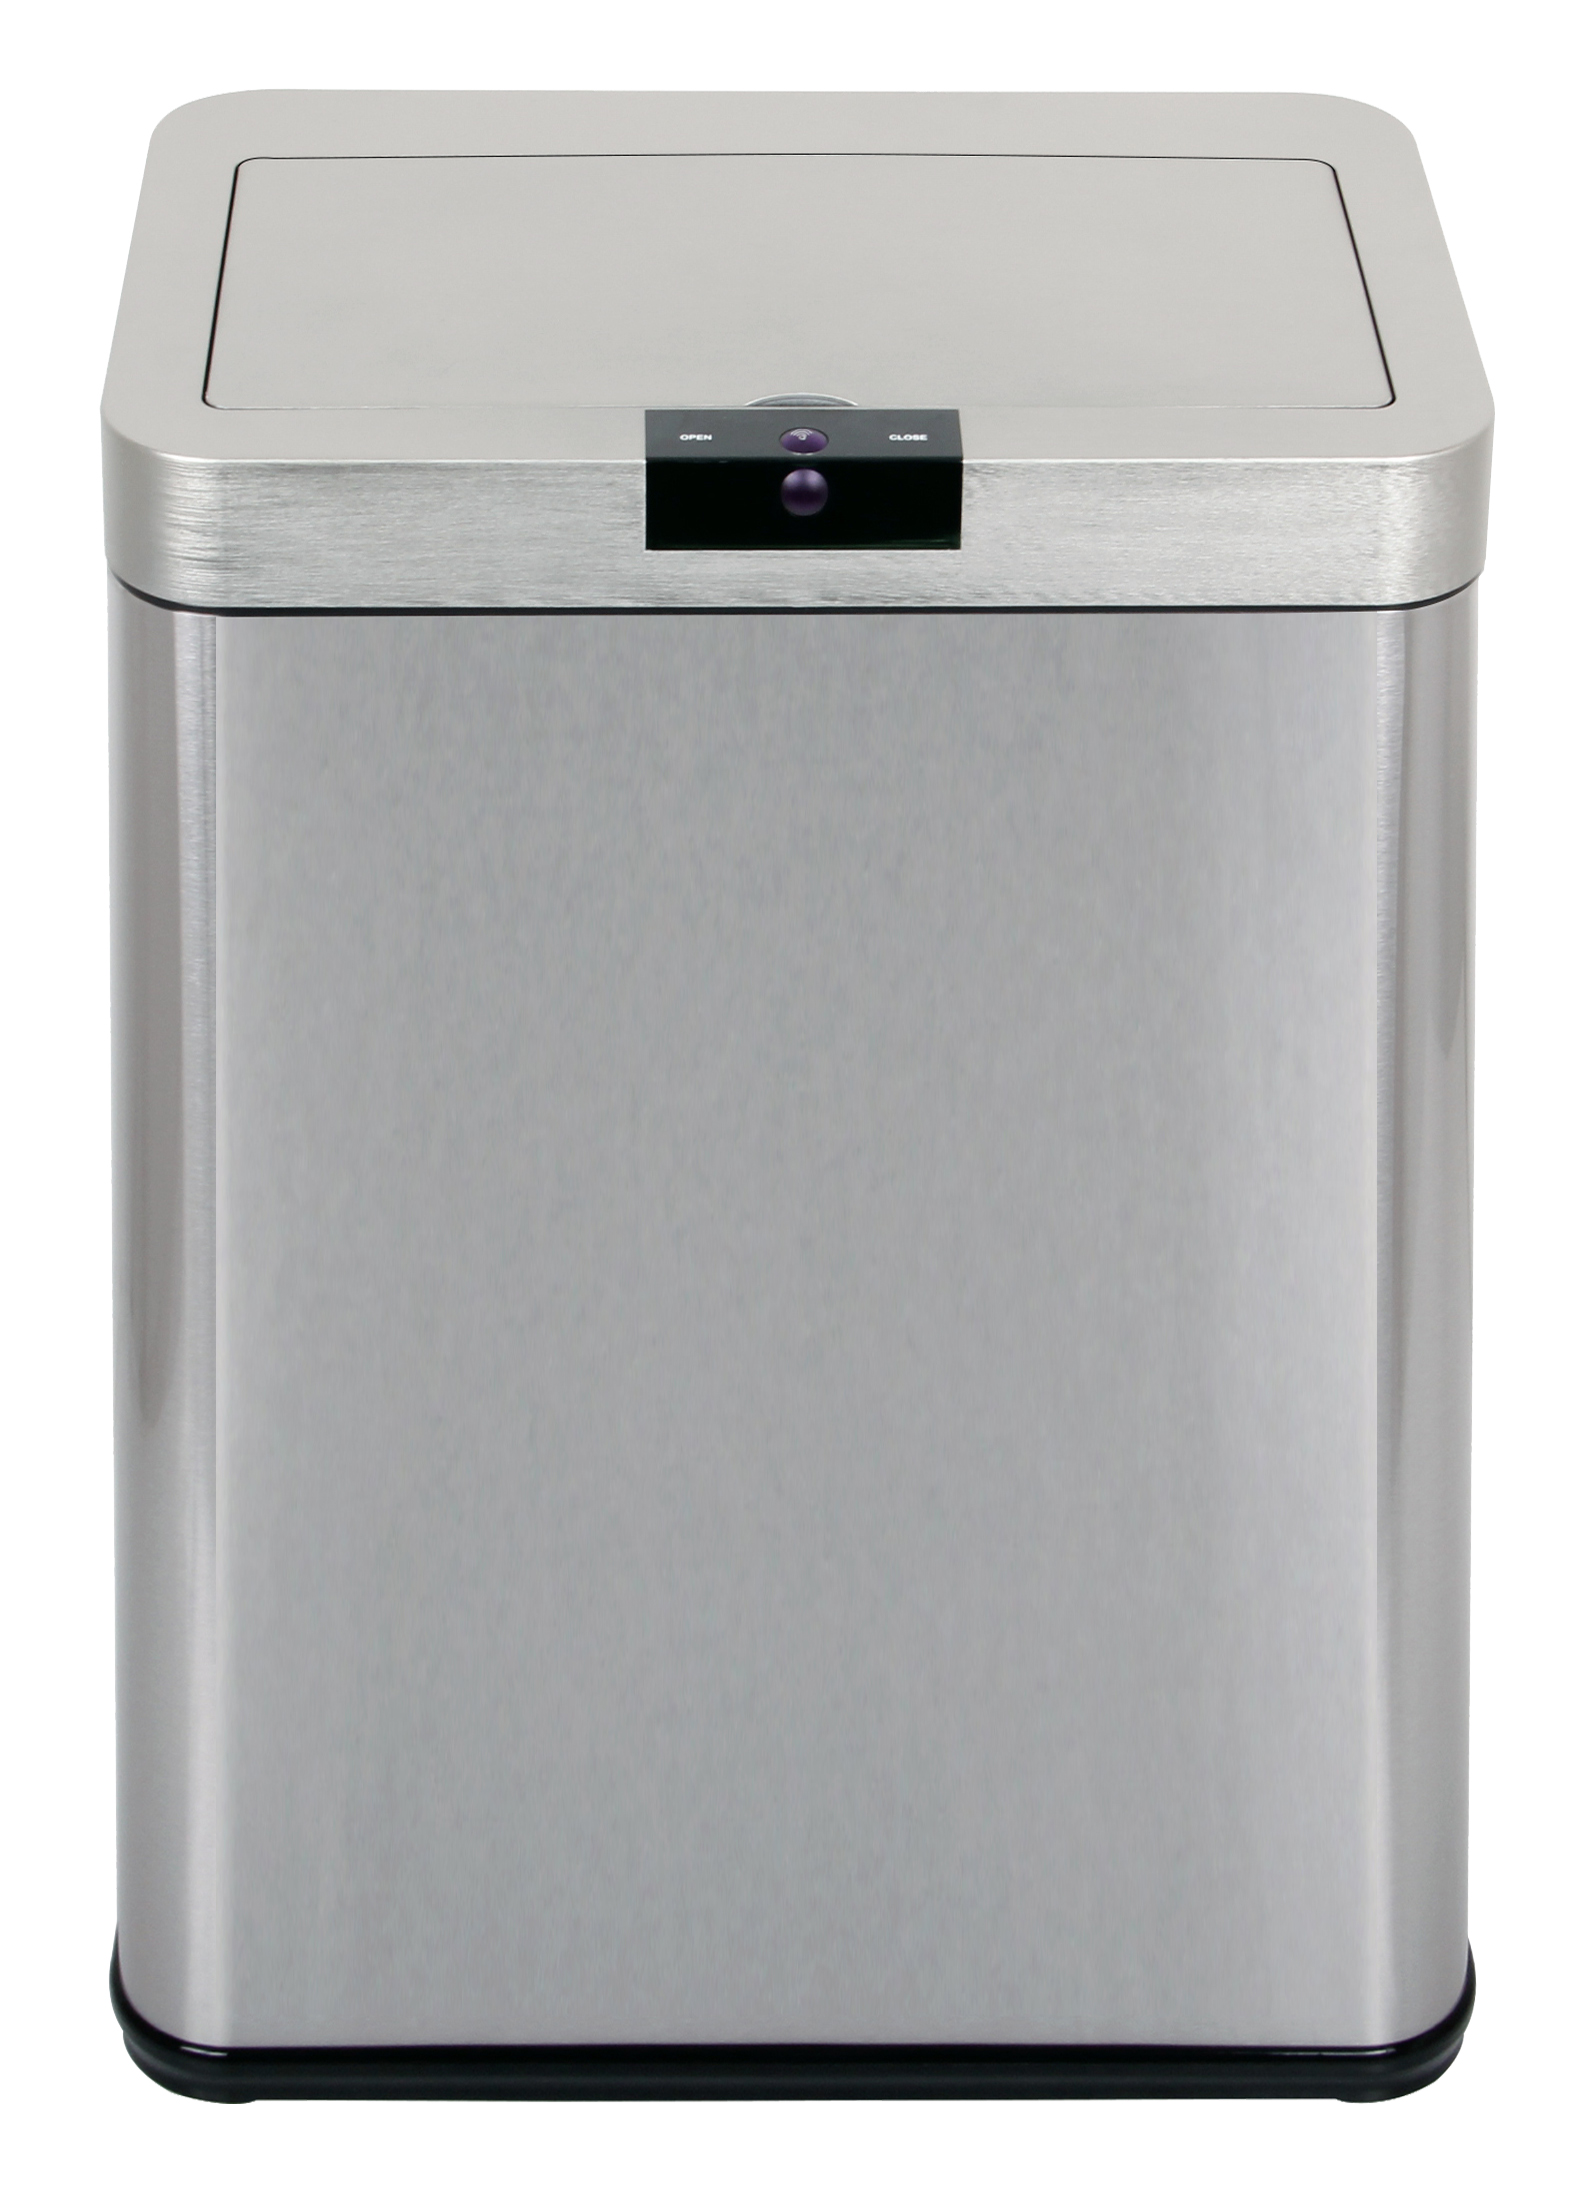 Sensor Trash Cans with Stainless Steel Material (KL-022A)